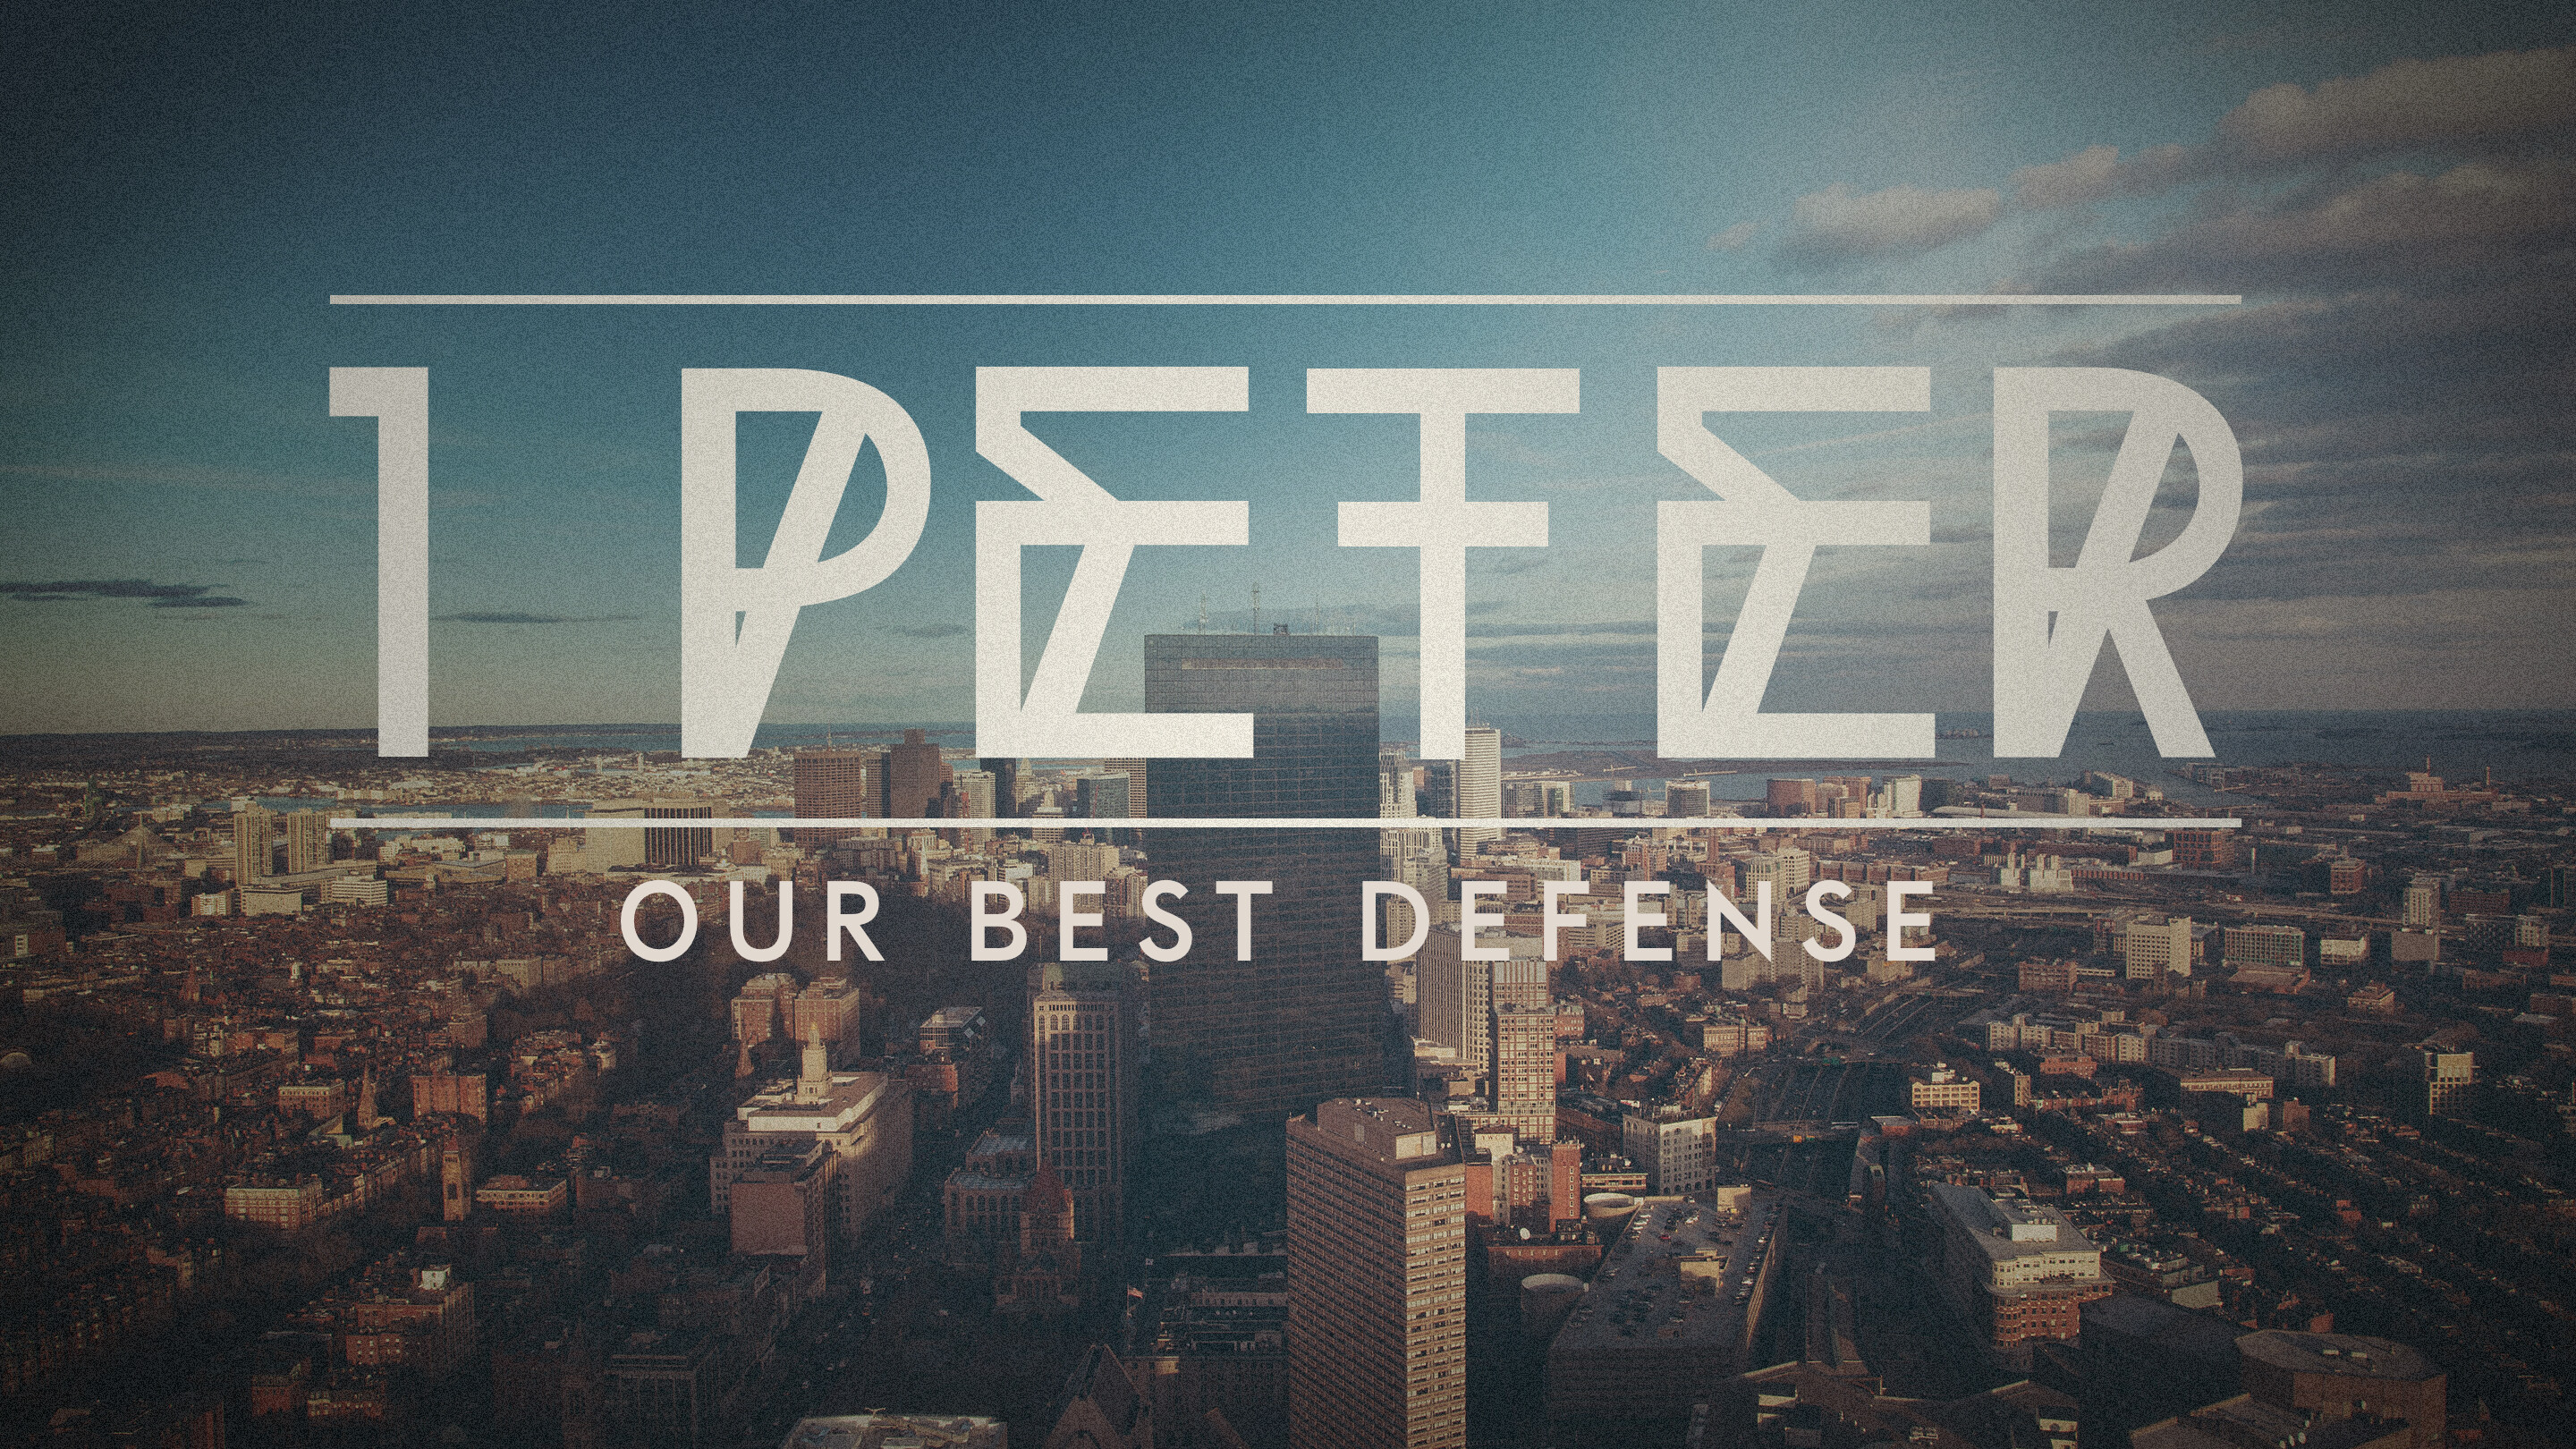 Our Best Defense